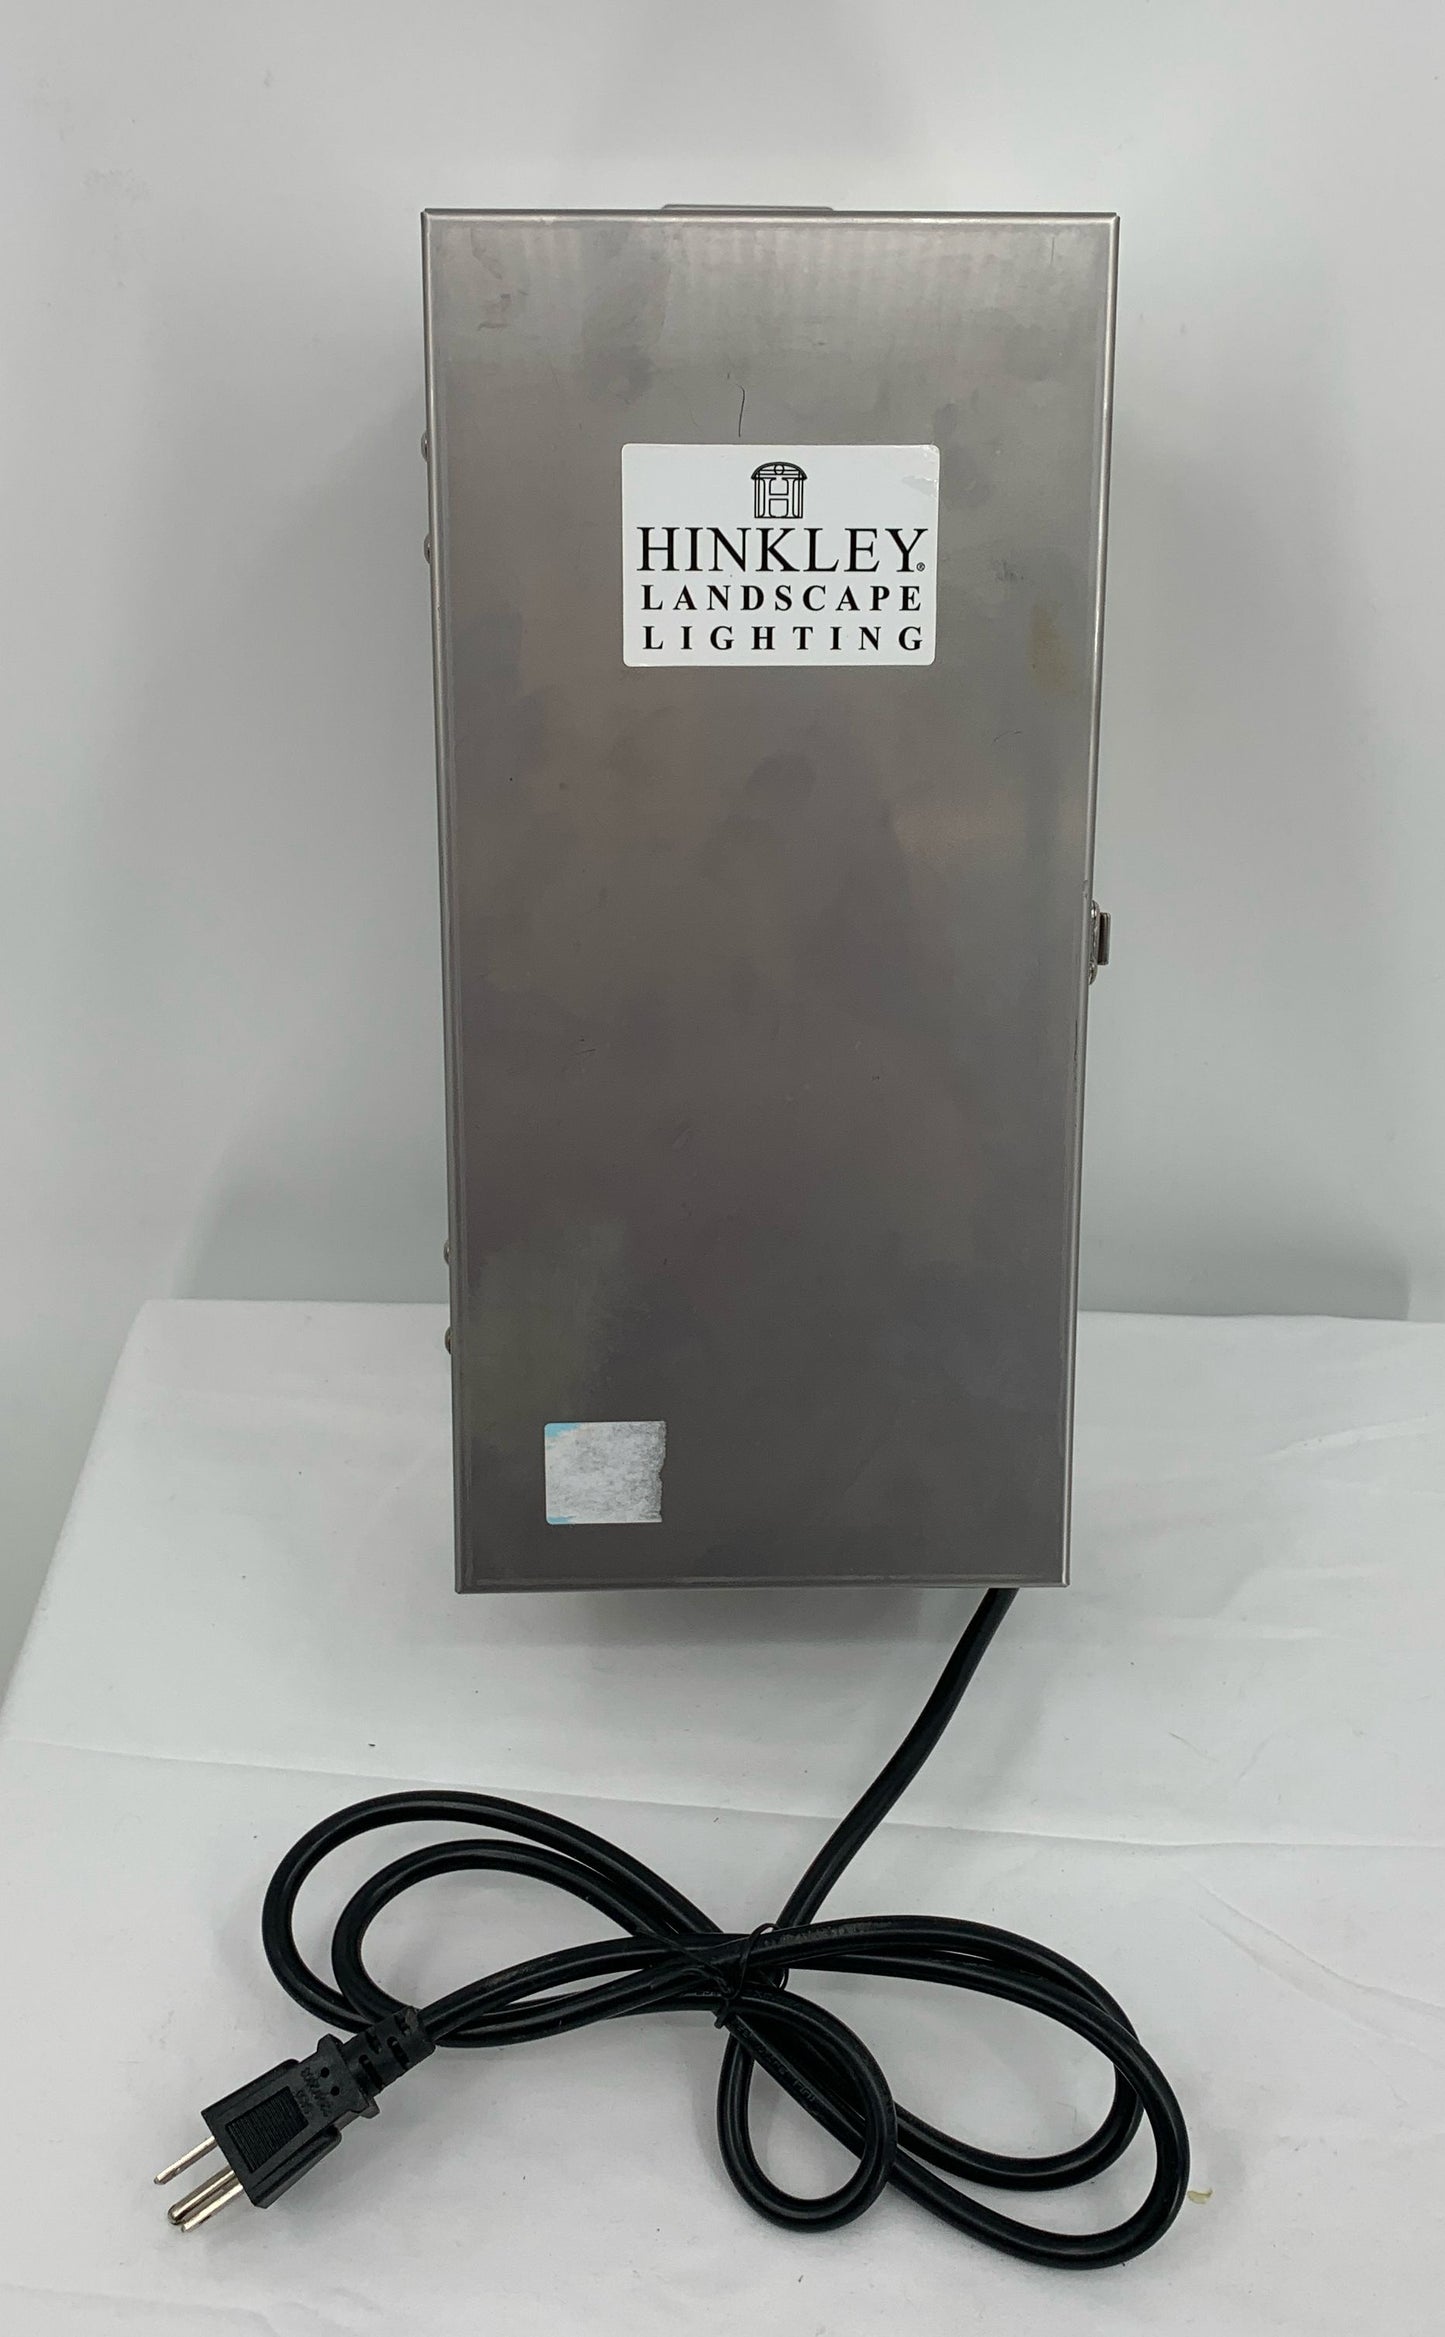 Hinkley Landscaping Lighting Transformer Low Voltage Power Control Console